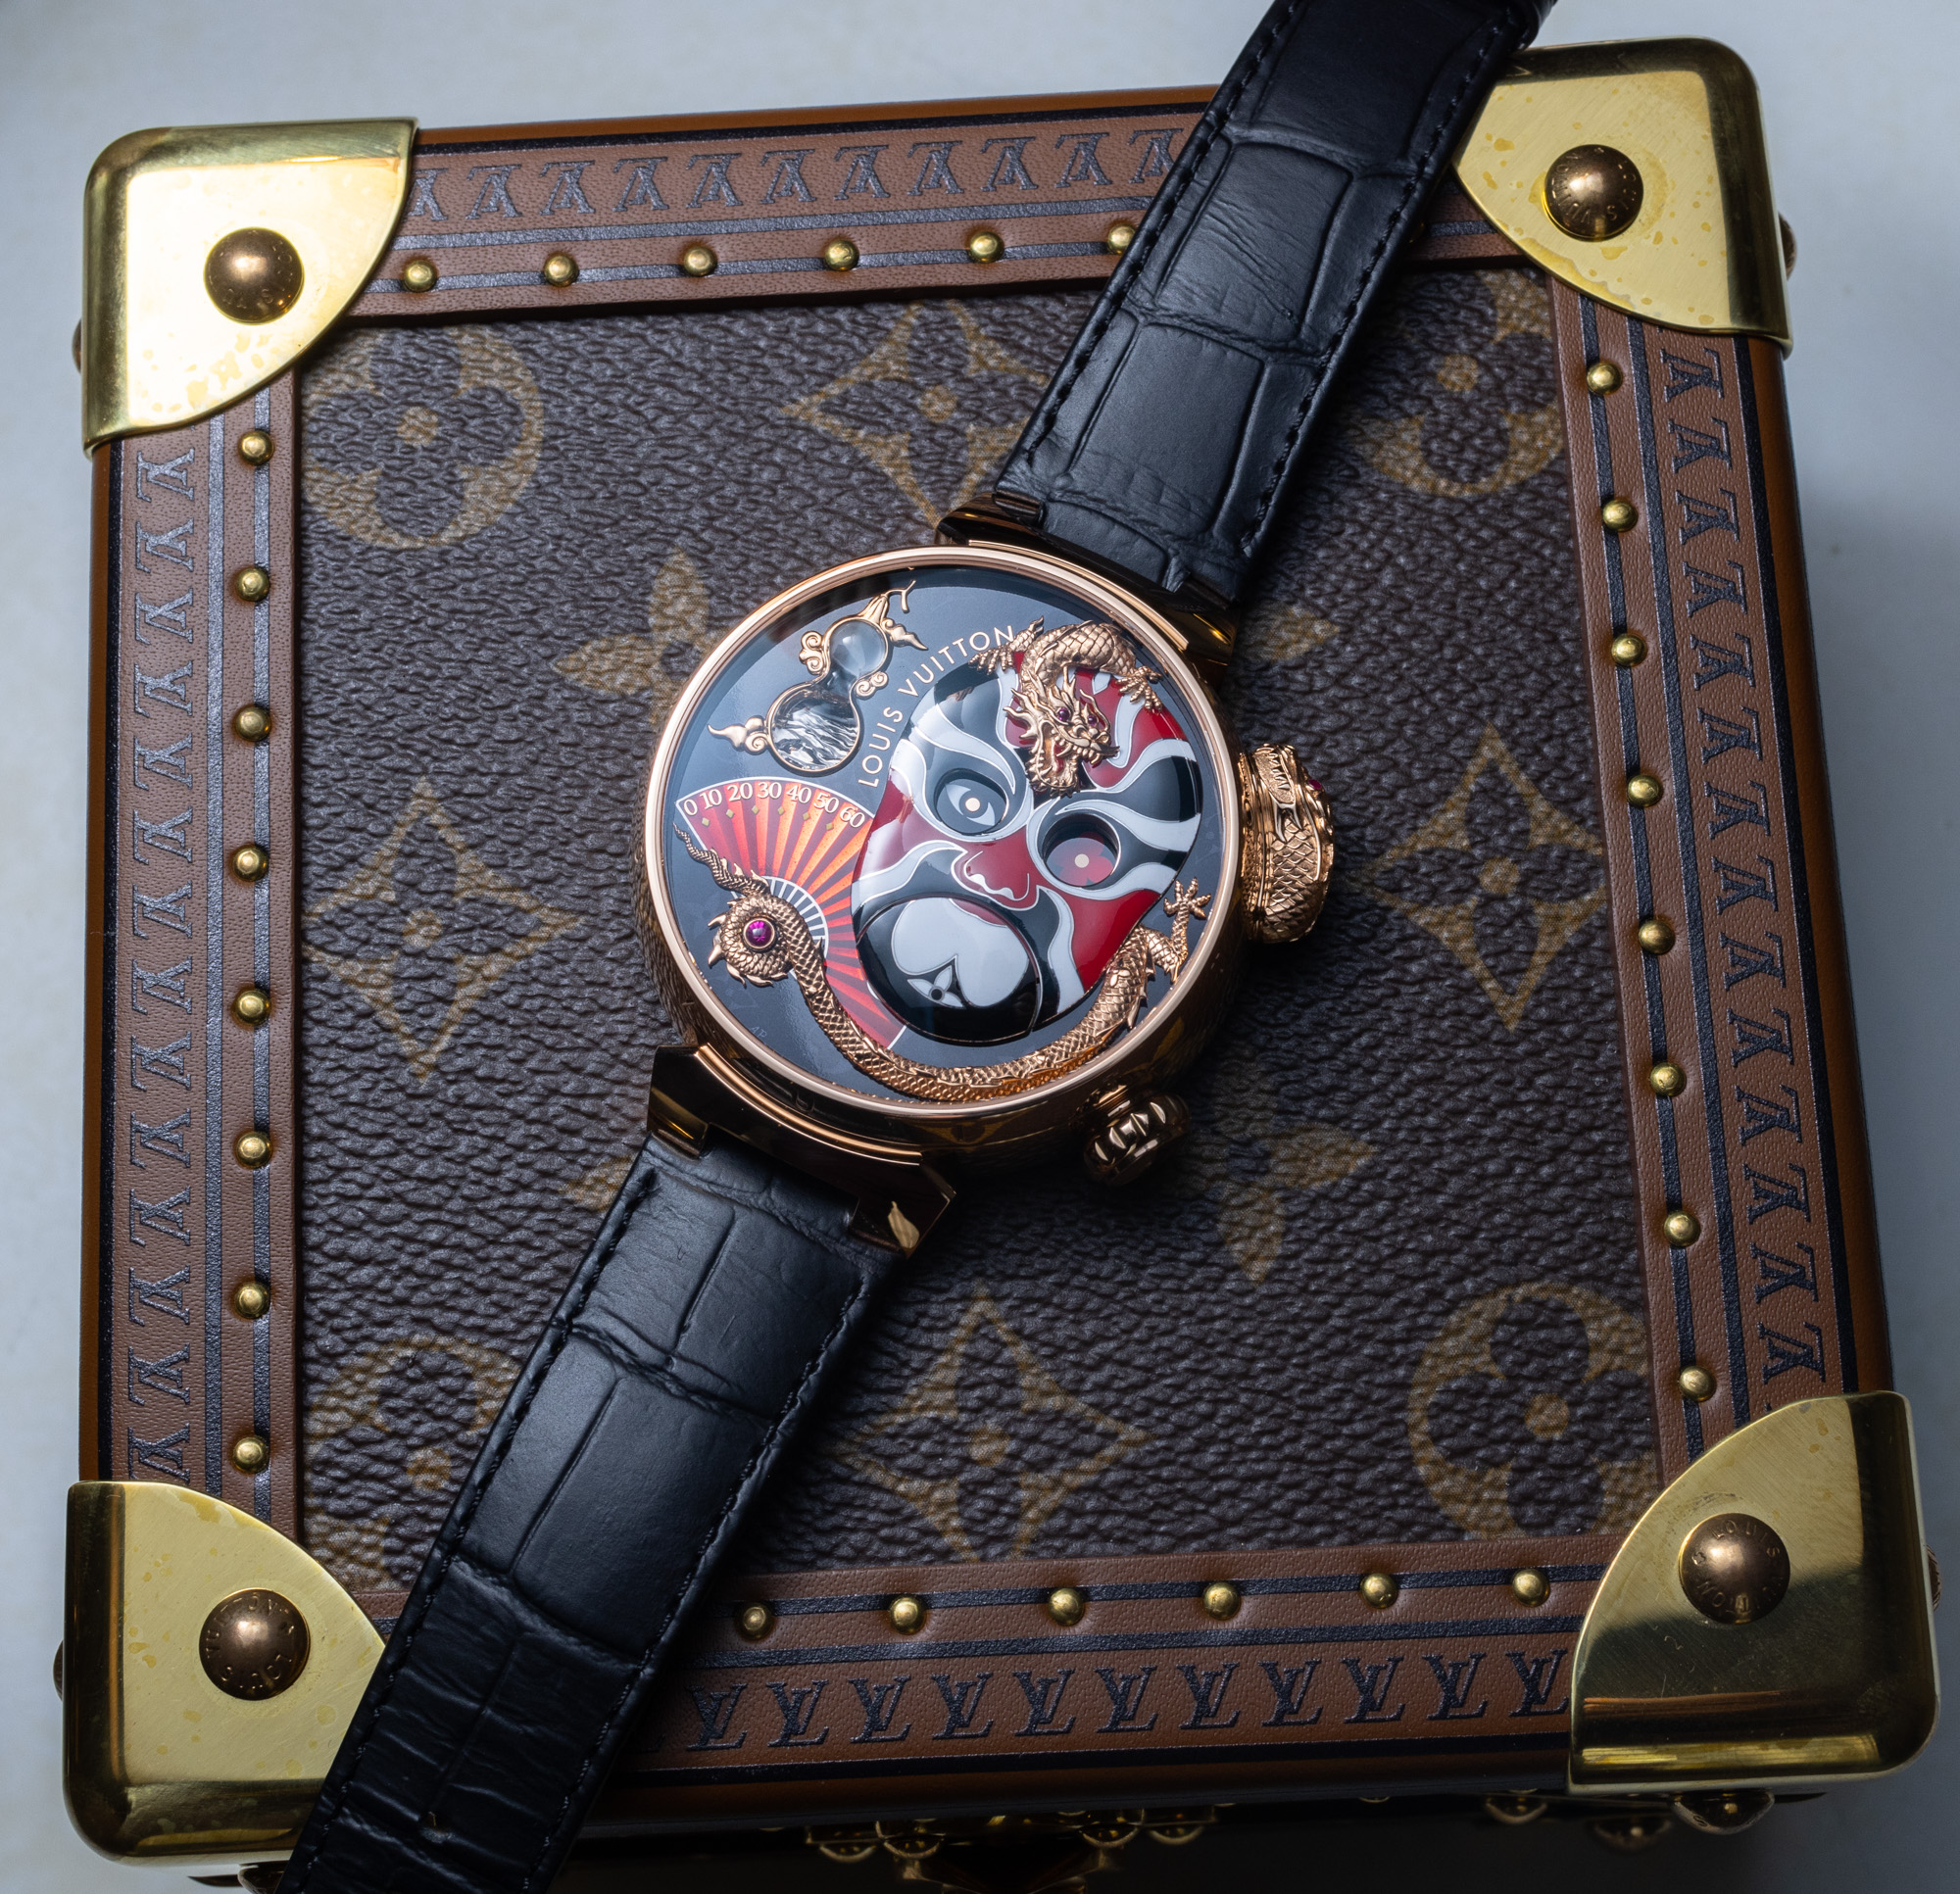 Hands-On: Louis Vuitton Tambour Opera Automata Watch With Dial